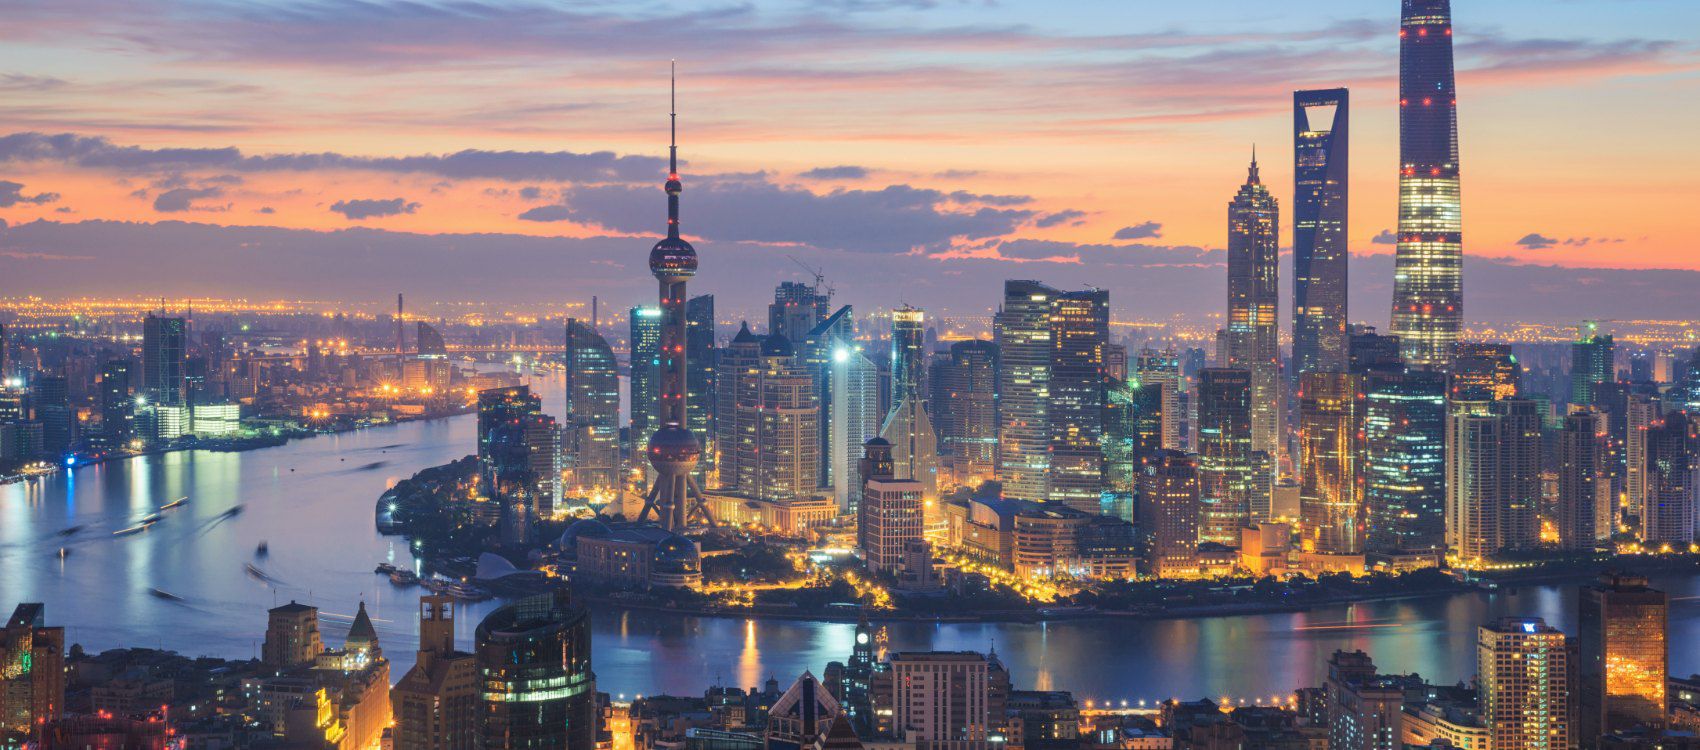 Shanghai city scape at nitght with river running through the city 